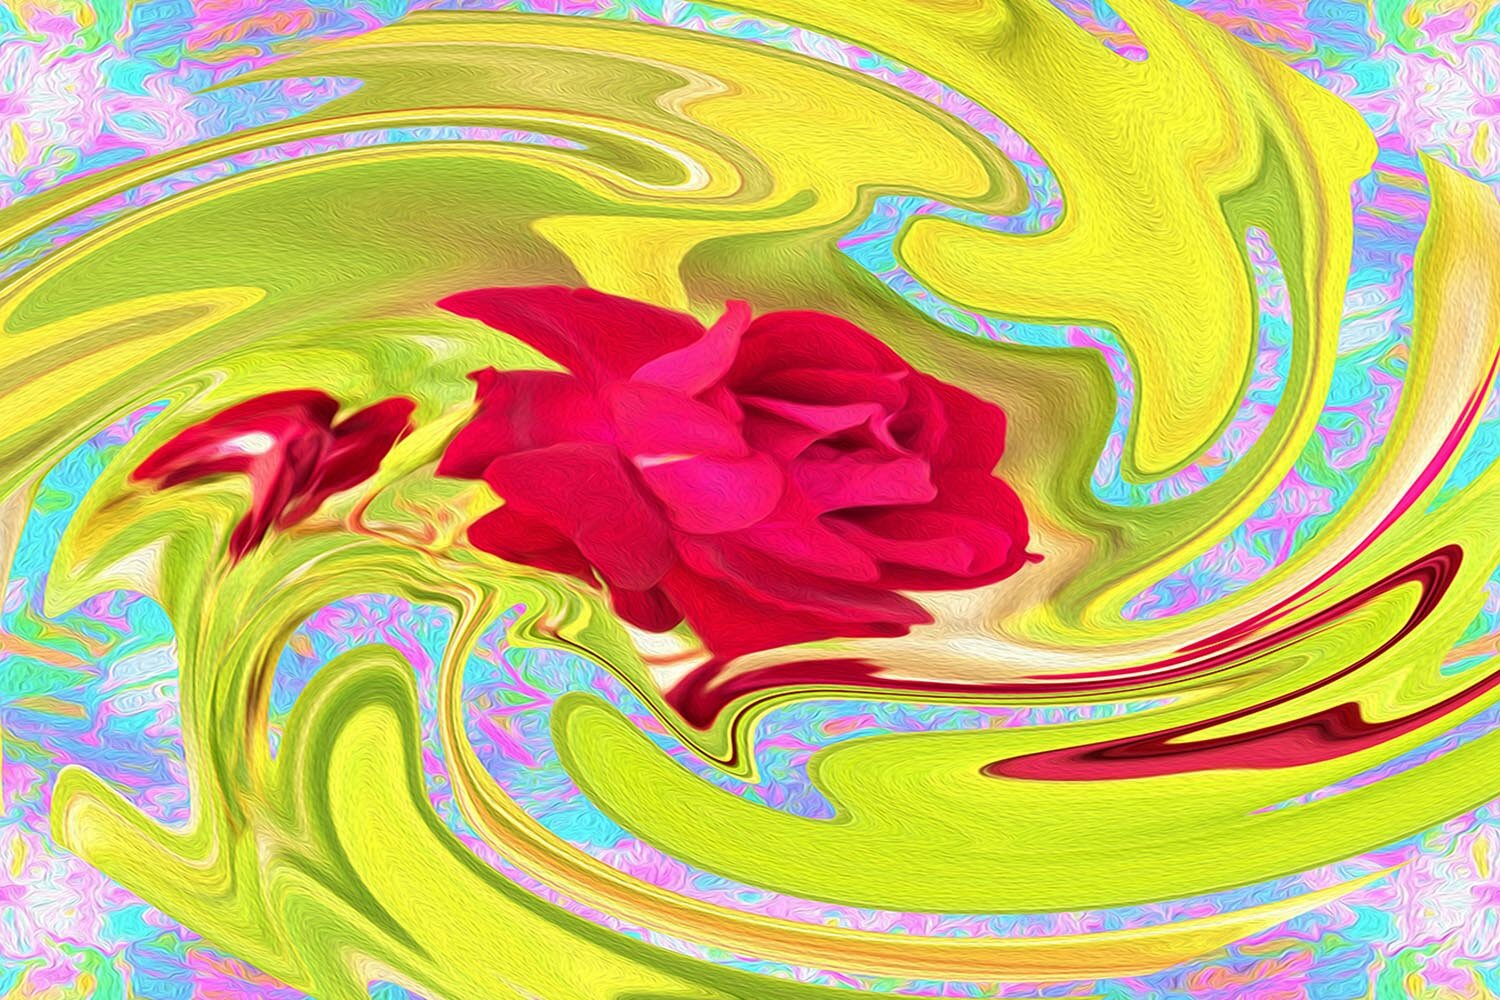 Abstract Red Rose on Yellow and Aqua Swirl